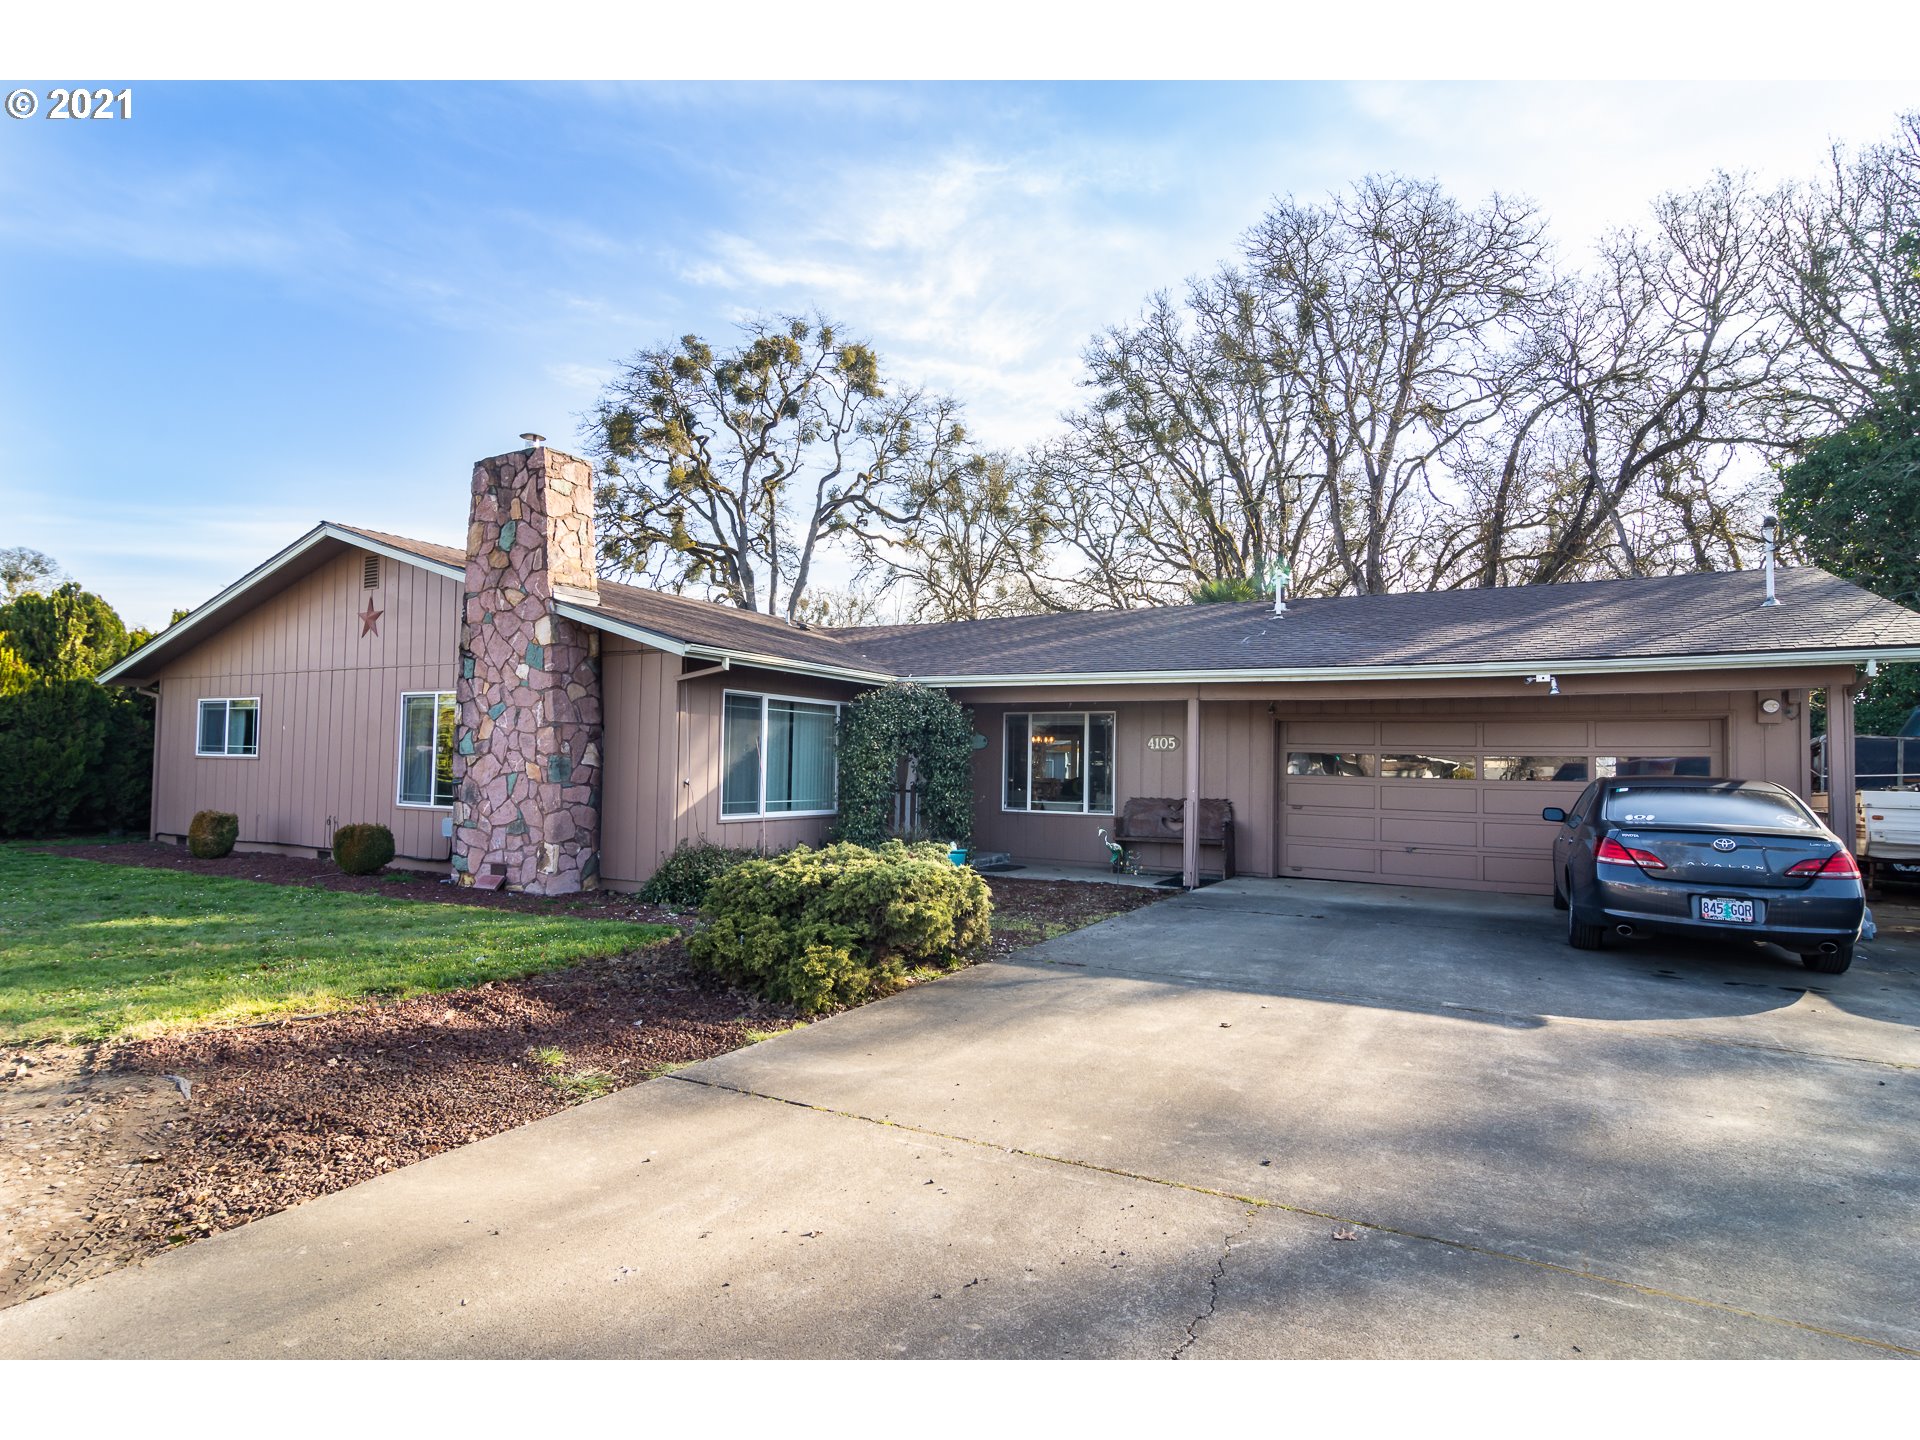 4105 CARNES RD (1 of 32)